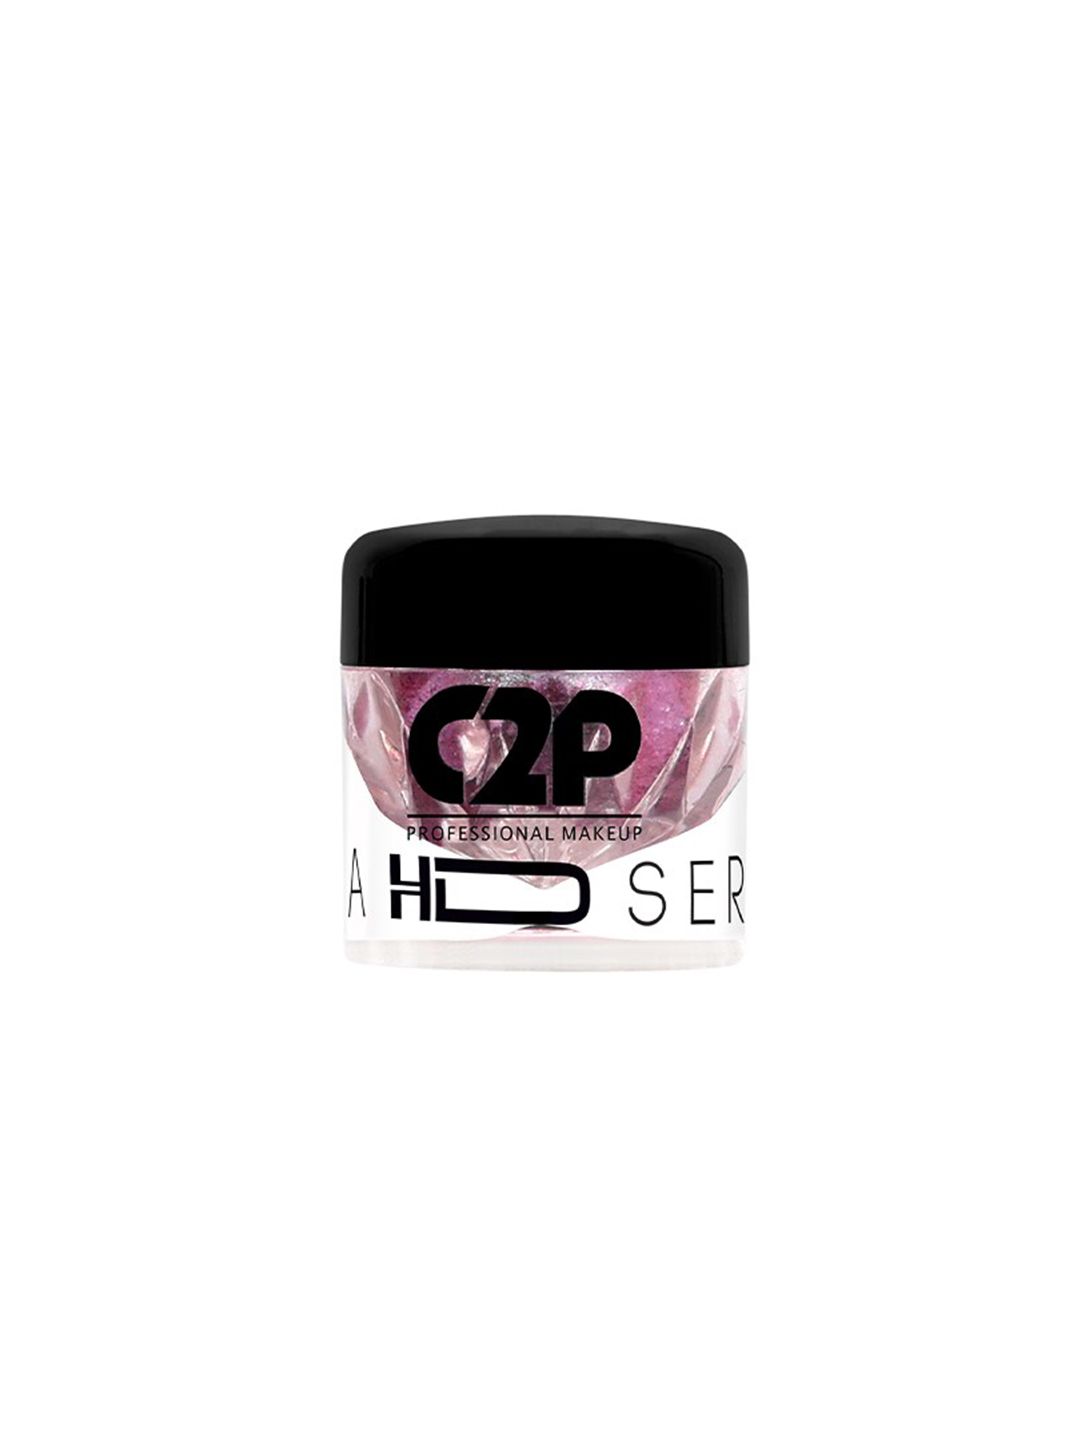 C2P PROFESSIONAL MAKEUP HD Loose Precious Pigments - Galaxy Dust 379 2 gm Price in India